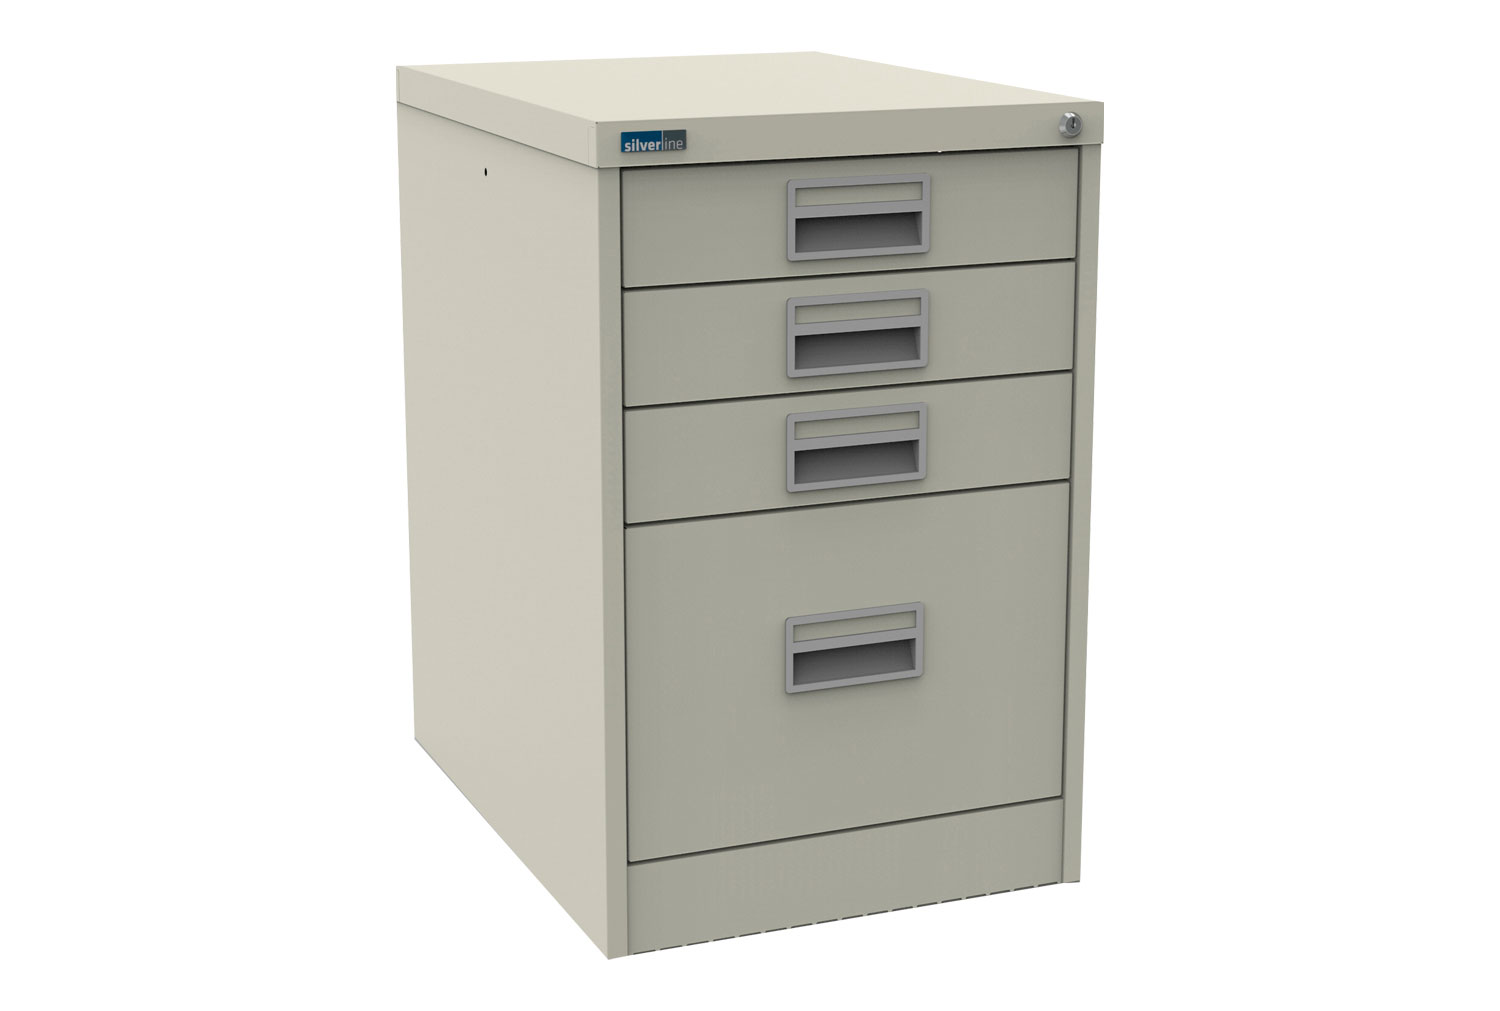 Silverline Midi 1+3 Drawer Filing Cabinets, 1+3 Drawer - 46wx62dx71h (cm), White Almond, Fully Installed